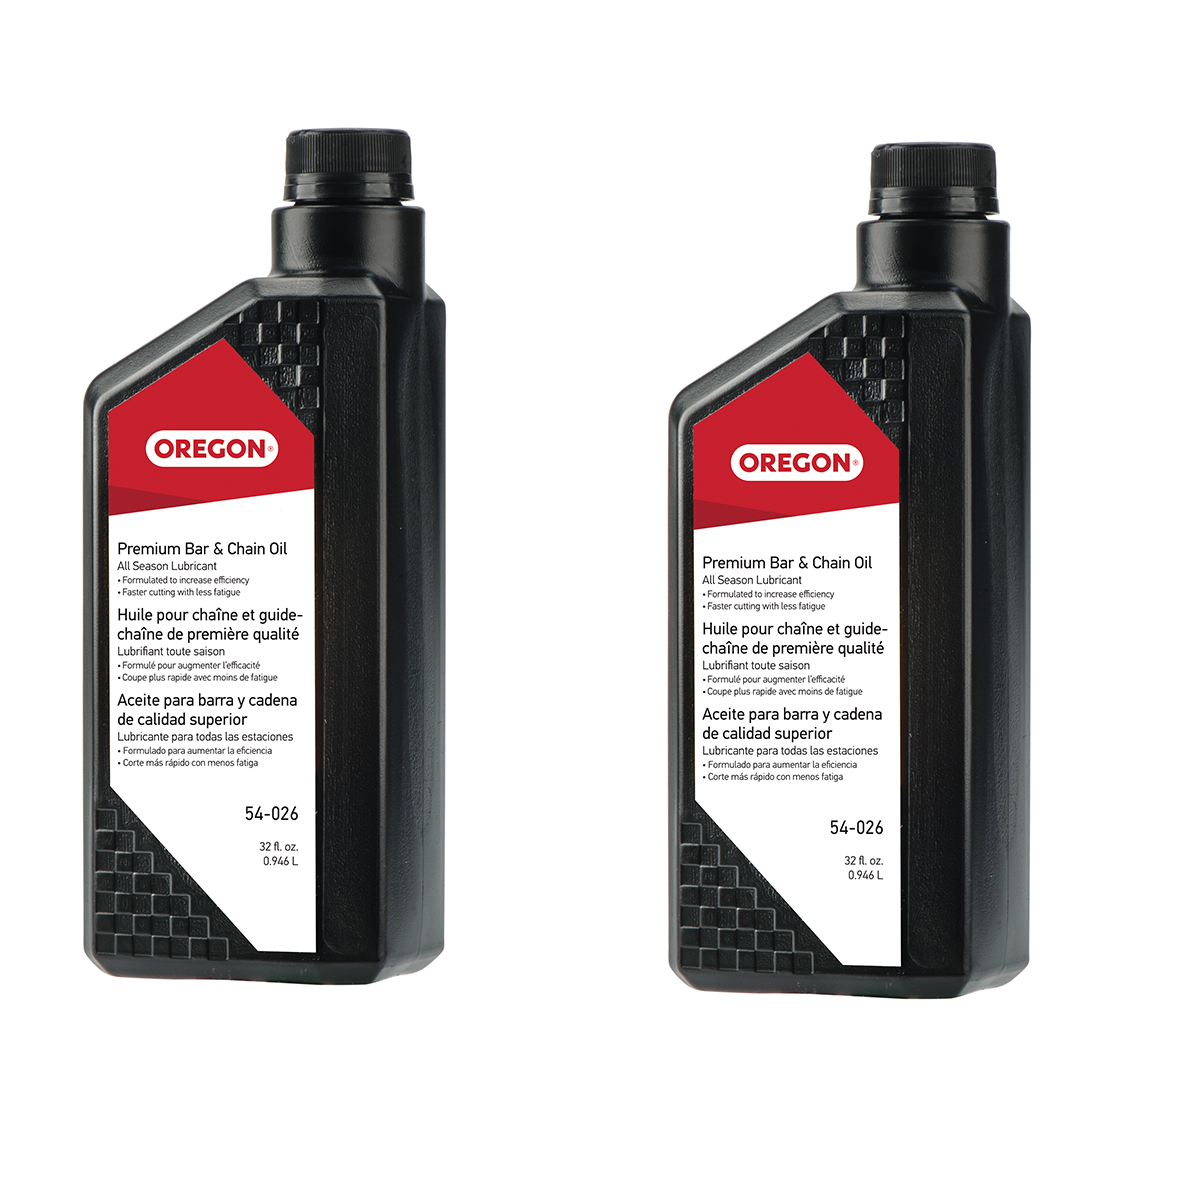 Oregon, 2 Pack Oregon 54-026 2 Quarts of Chainsaw Bar and Chain Oil